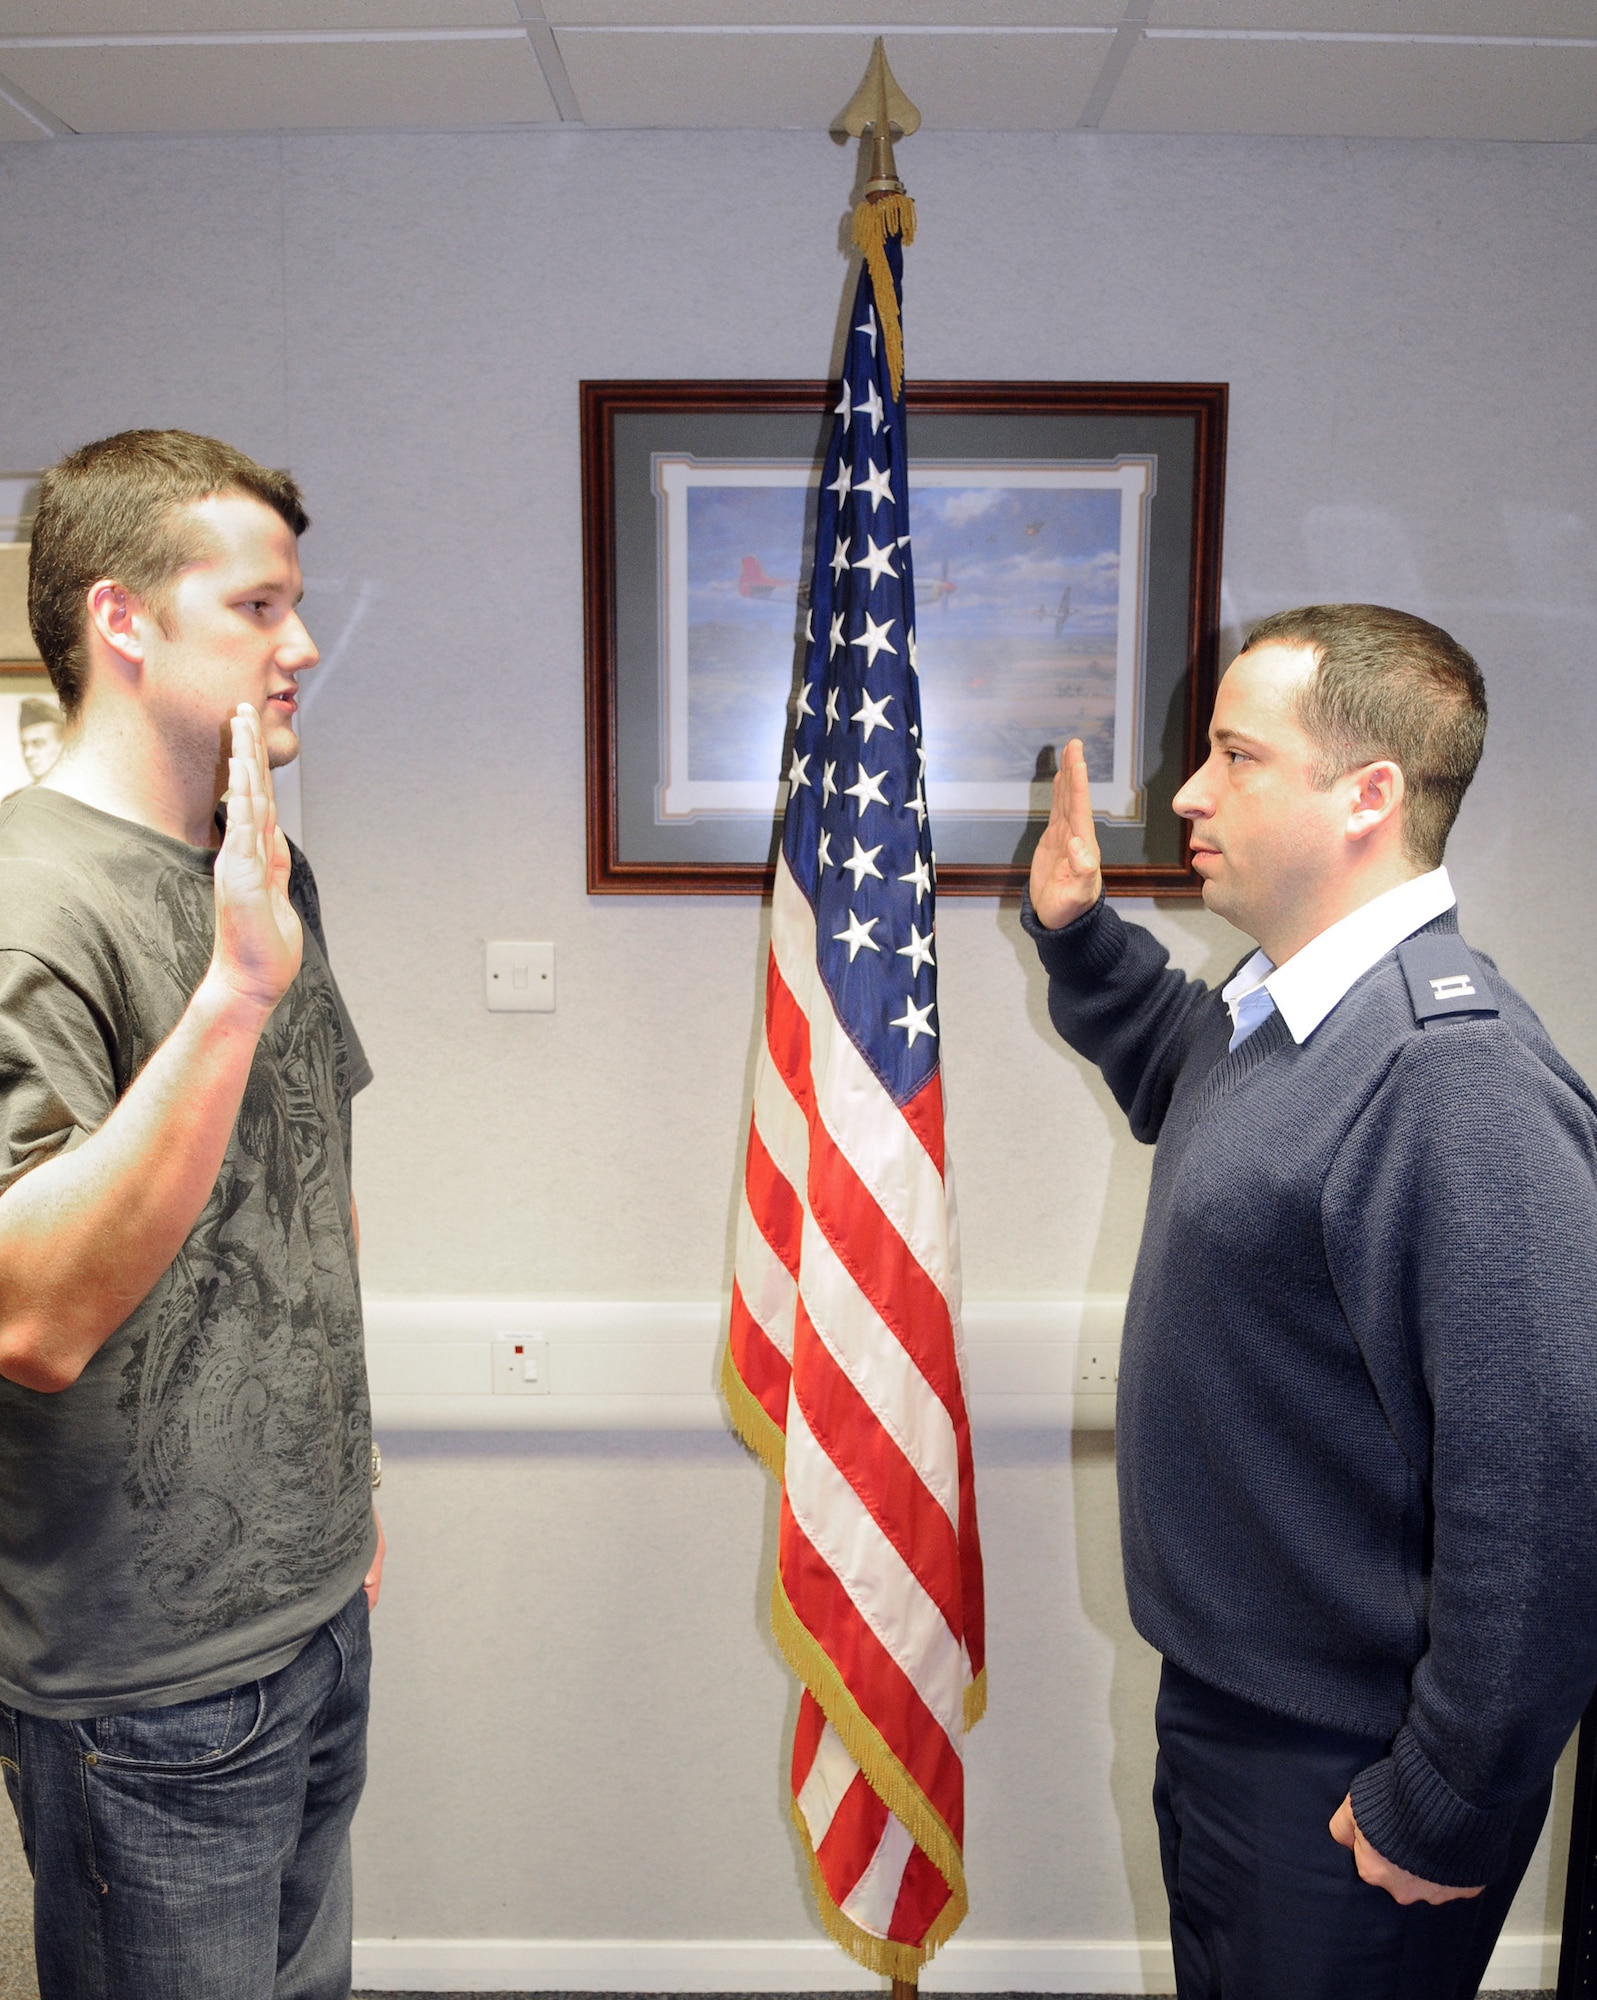 RAF MILDENHALL, England -- Daniel Coughlin (left) takes the oath of enlistment from Capt. Sidney Squires, 100th Force Support Squadron operations officer, at the Professional Development Center here Nov. 23. Daniel is a British-born American citizen who enlisted in the Air Force to become an aircraft hydraulics maintenance technician. He joins his brother, Joseph, as the third generation of his family to serve in the military. (U.S. Air Force photo/Senior Airman Thomas Trower)